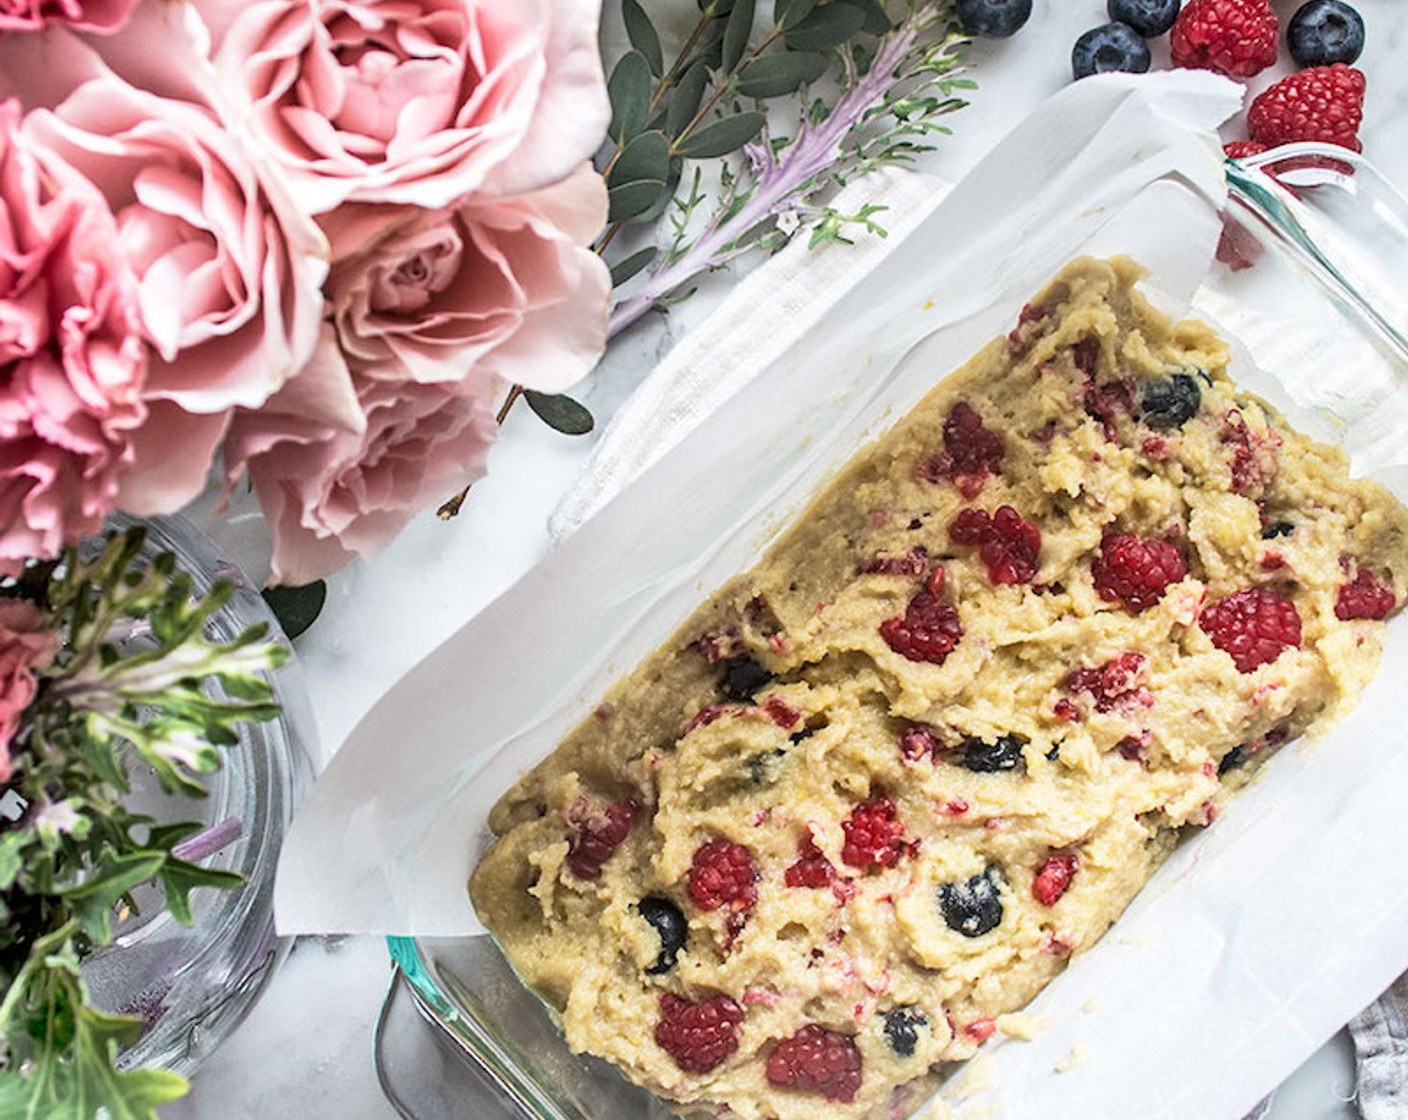 step 6 Pour batter into prepared loaf pan, spread evenly, and top with a few remaining blueberries and raspberries.